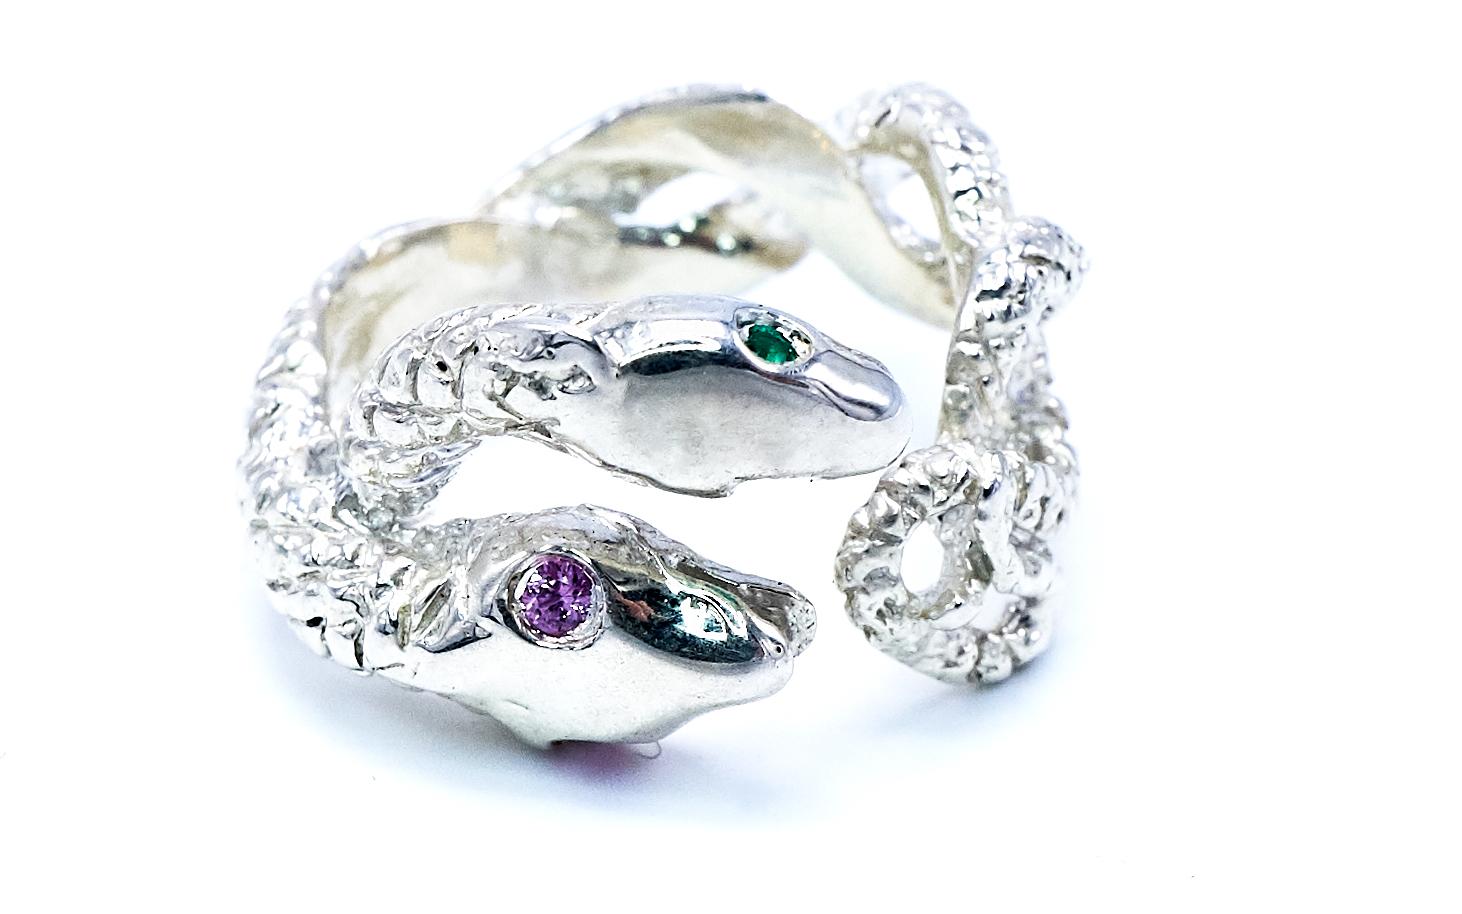 Women's or Men's Snake Ring Emerald Pink Sapphire Sterling Silver Statement Cocktail J Dauphin For Sale